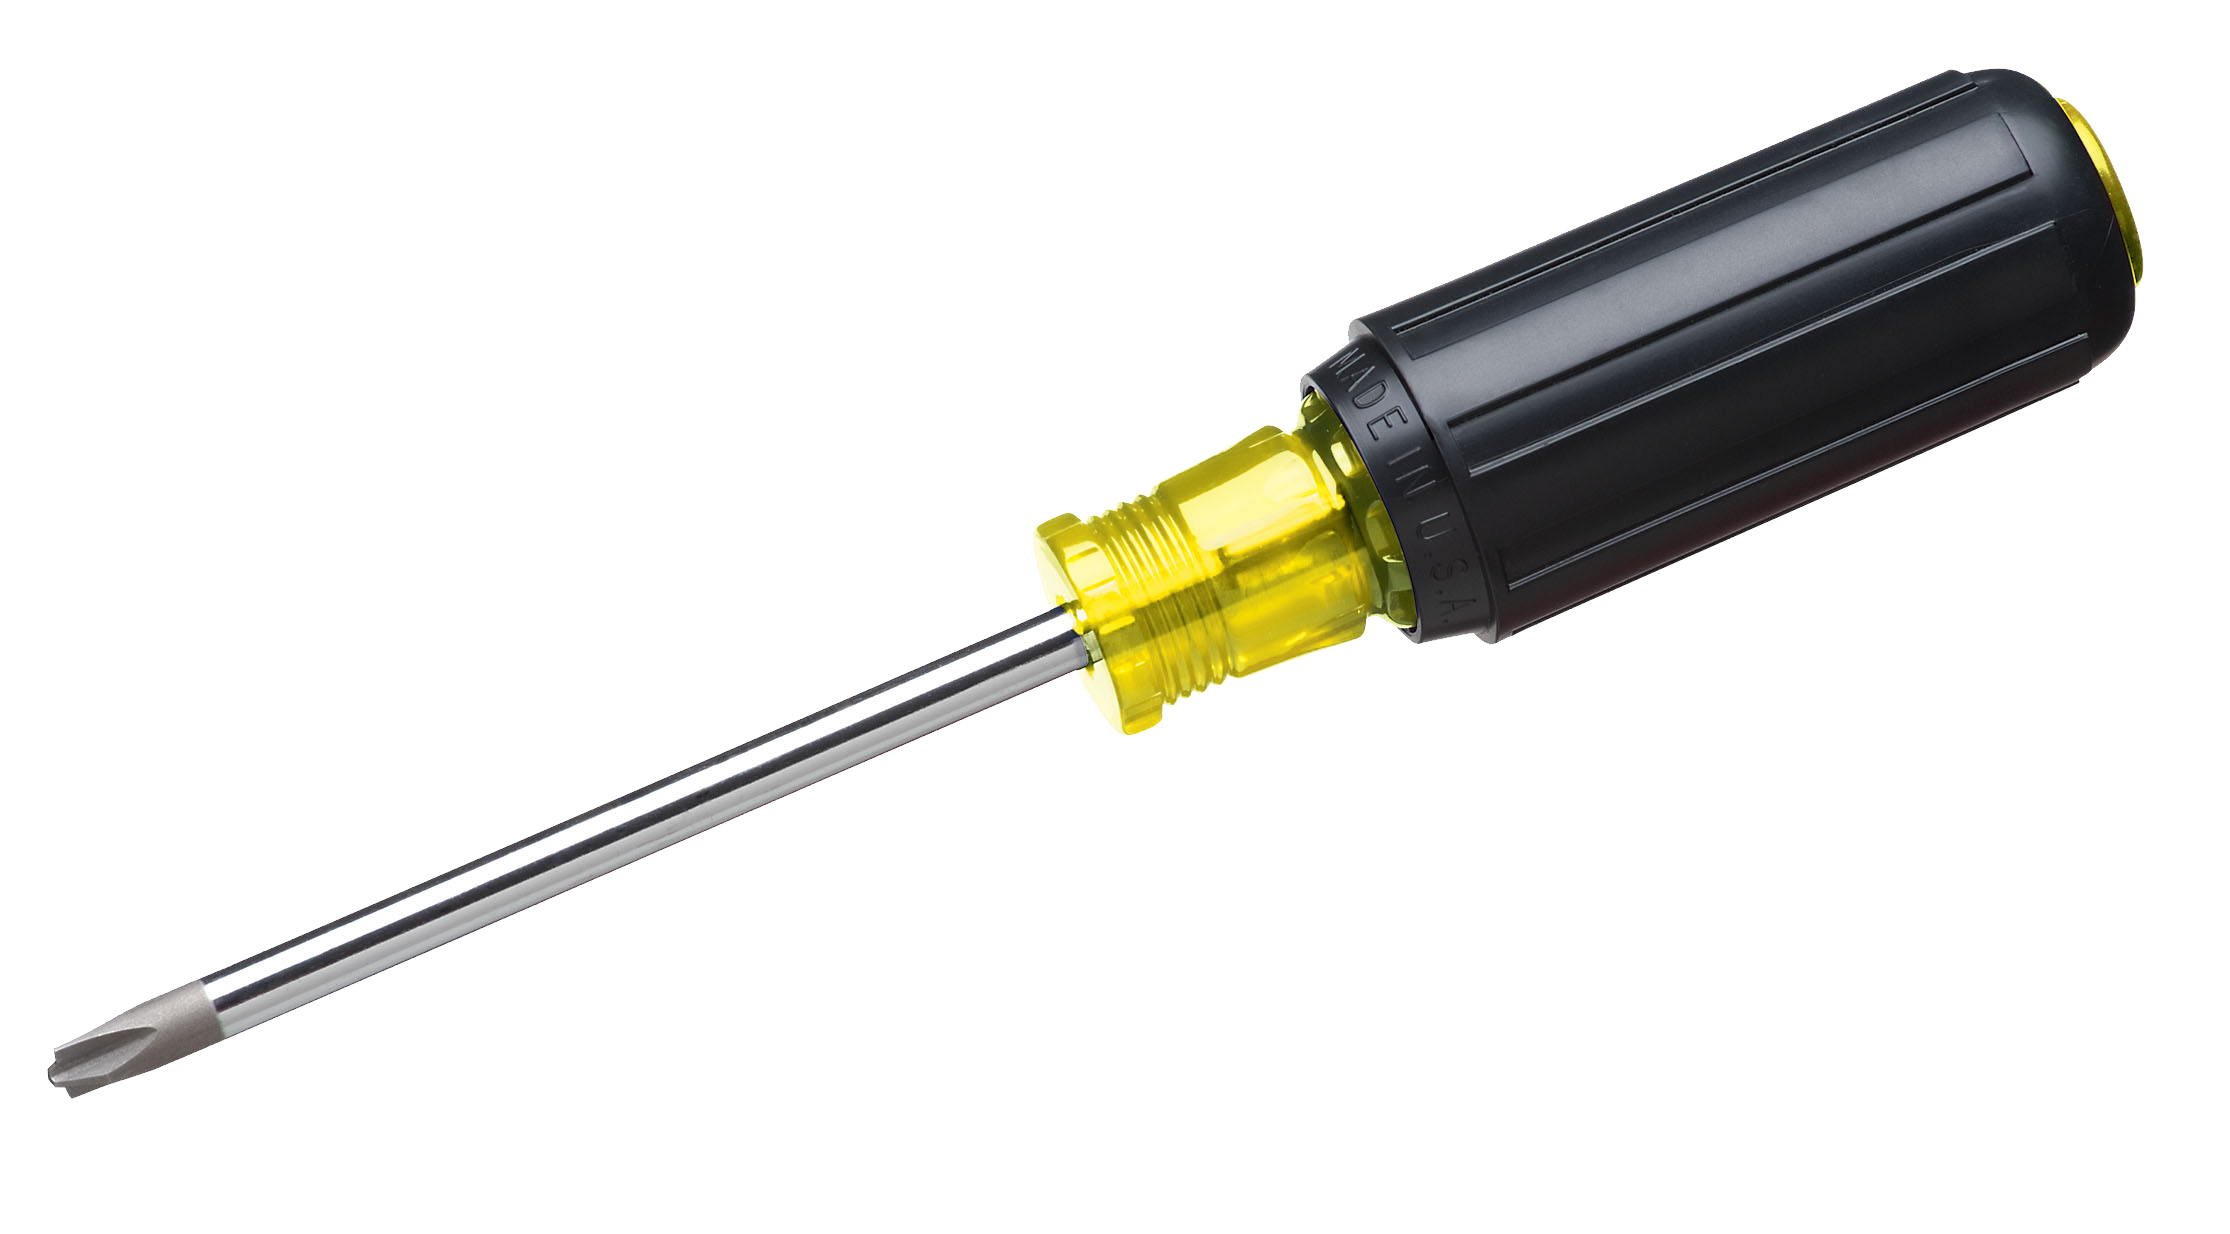 Png transparent images all. Screwdriver clipart electric